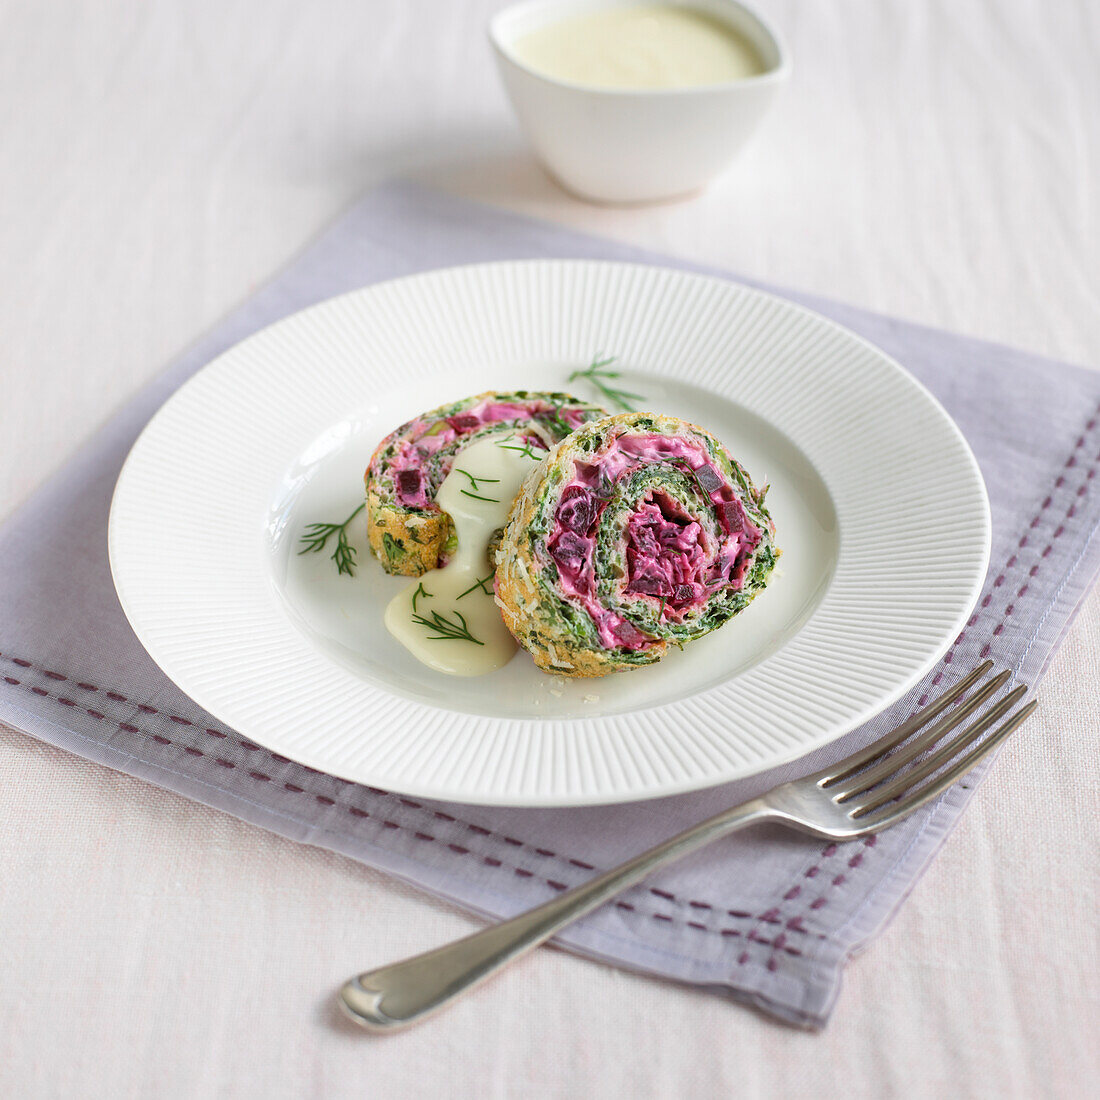 Watercress and beetroot roulade with cheese sauce